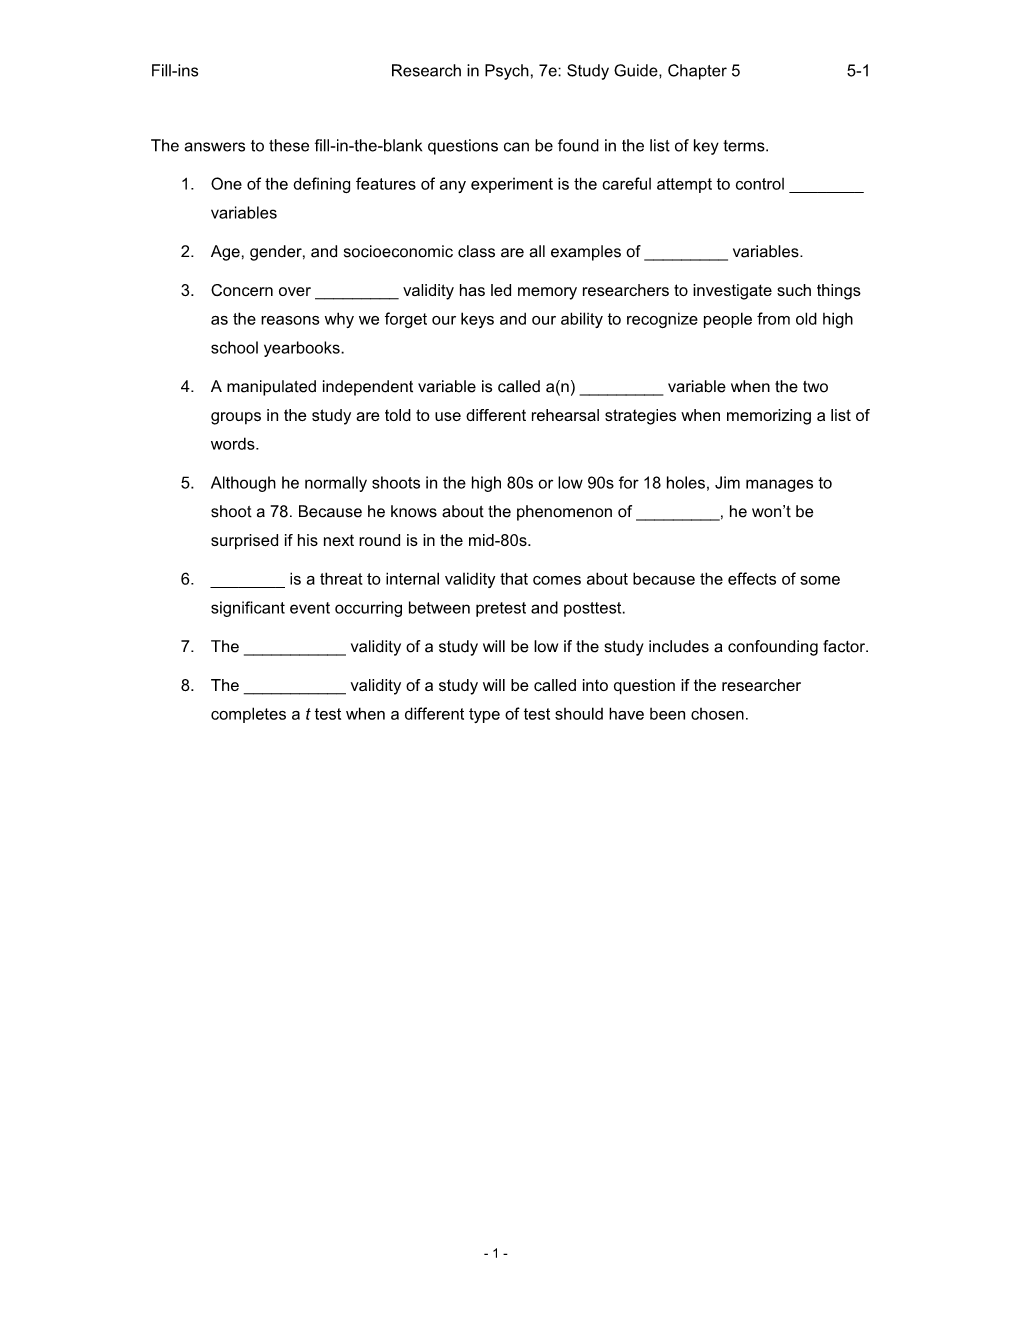 Fill-Ins Research in Psych, 7E: Study Guide, Chapter 5 5-1